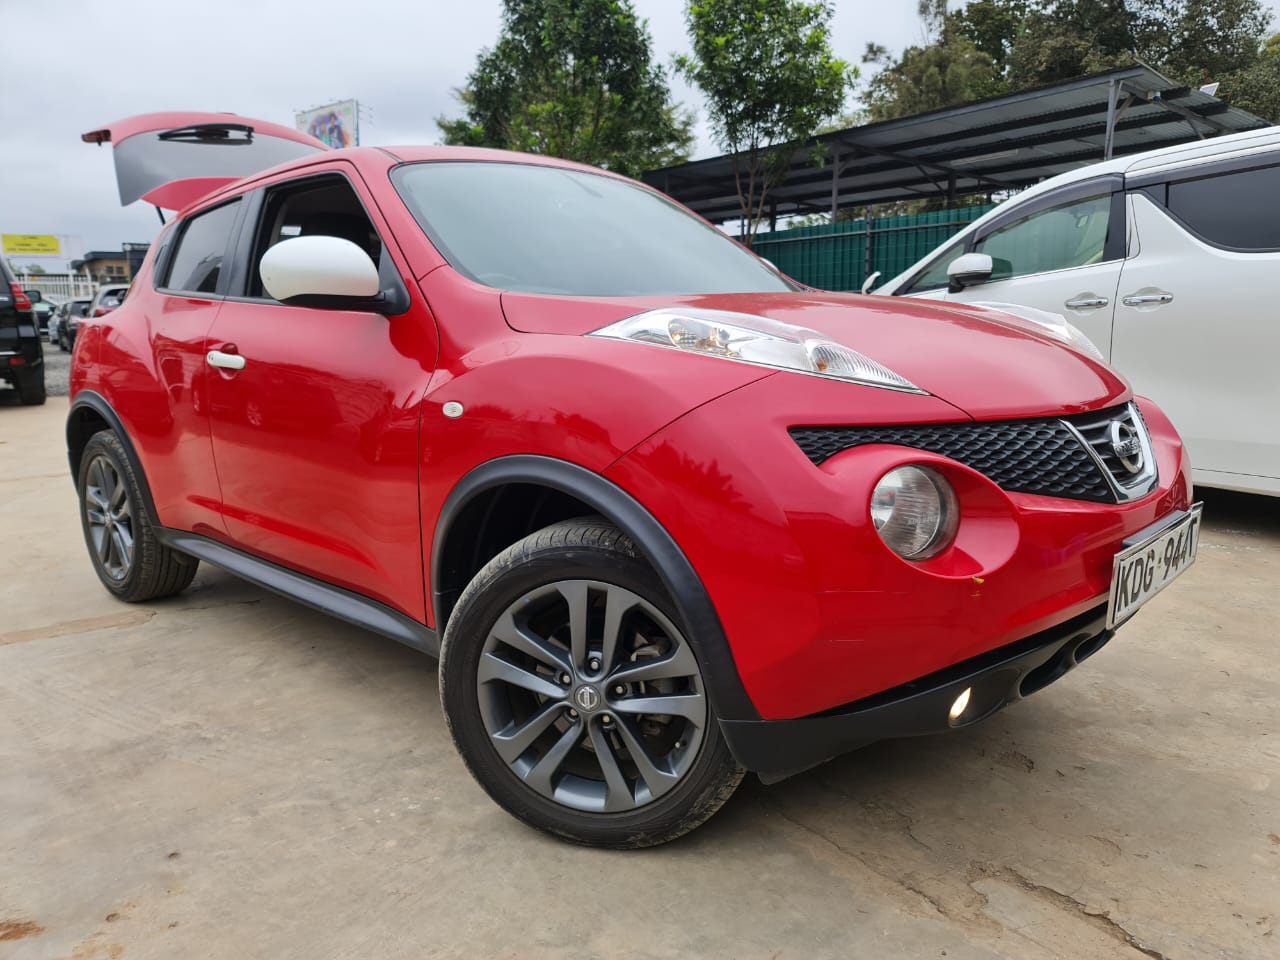 Nissan Juke Asian Owner QUICKEST SALE You ONLY Pay 30% Deposit Trade in Ok EXCLUSIVE